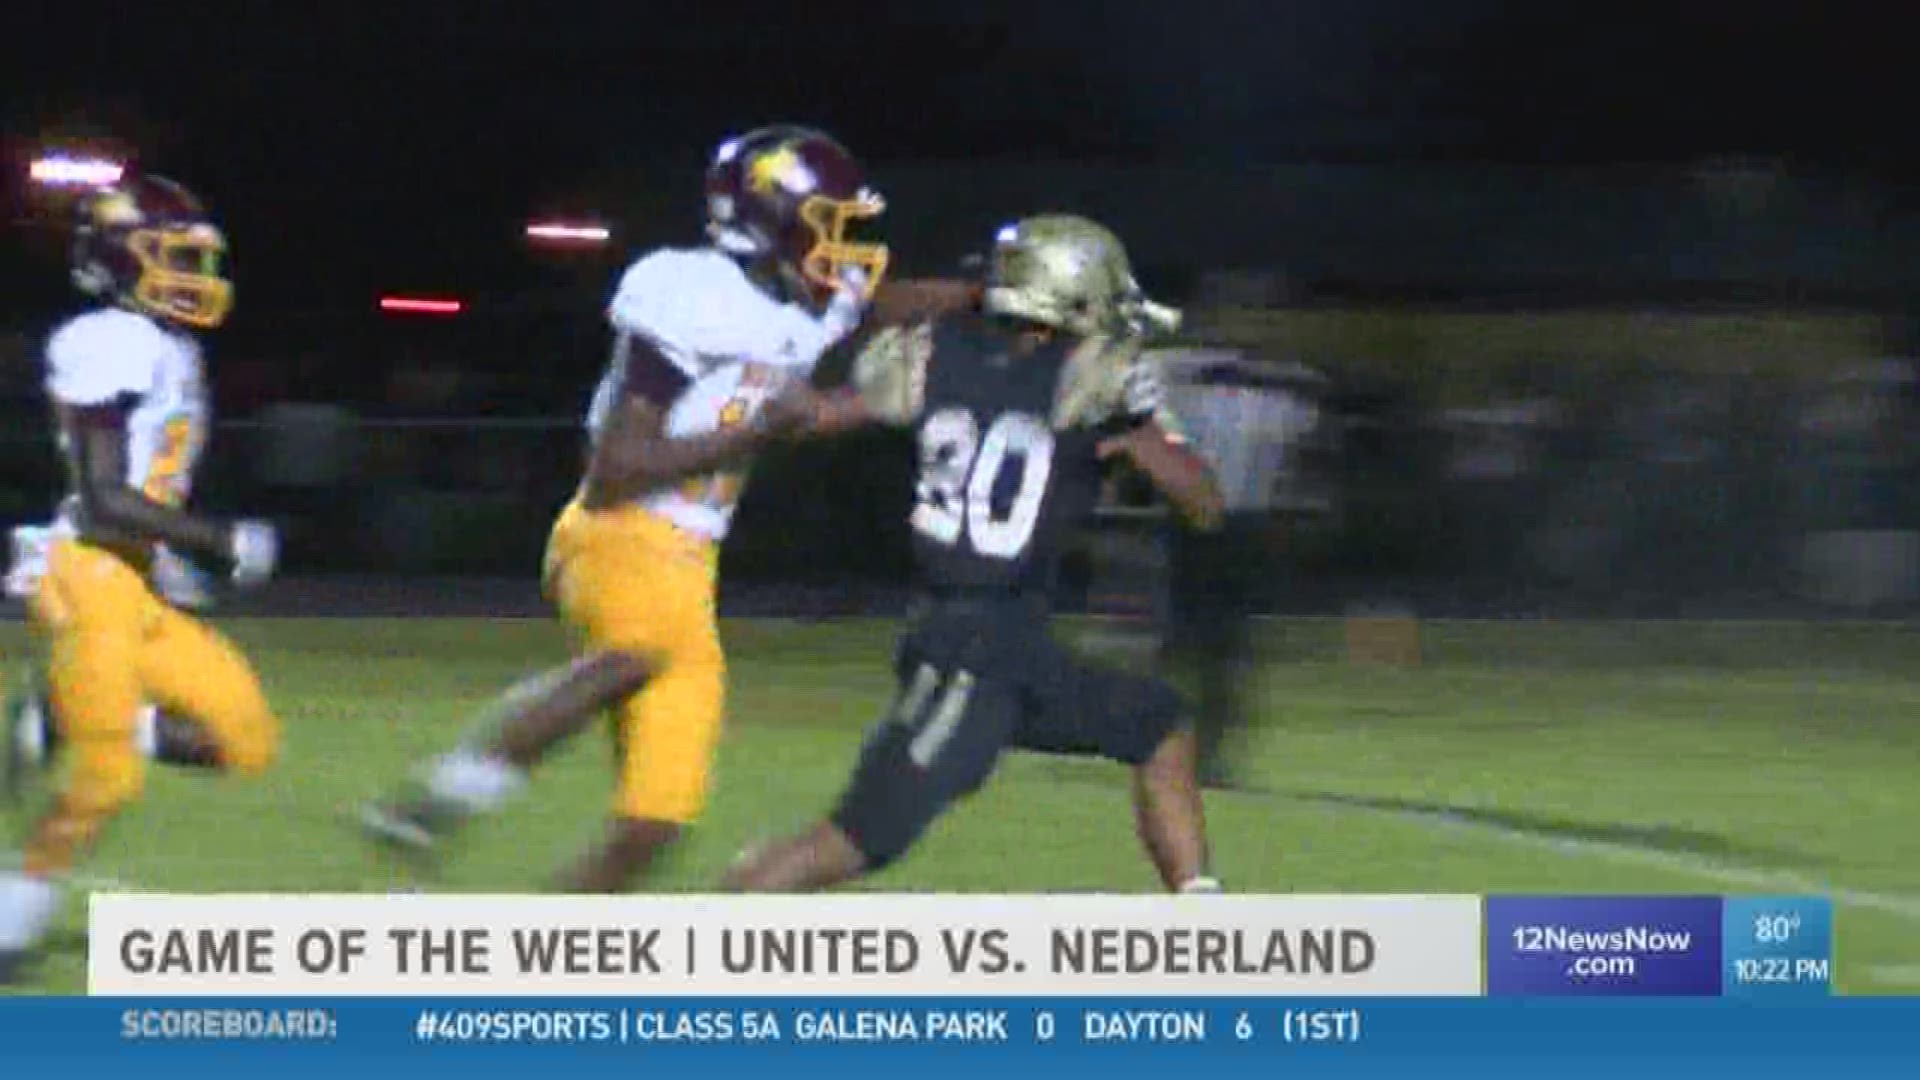 WEEK 2: Nederland beats Beaumont United 33 - 14 in the #409Sports Game of the Week